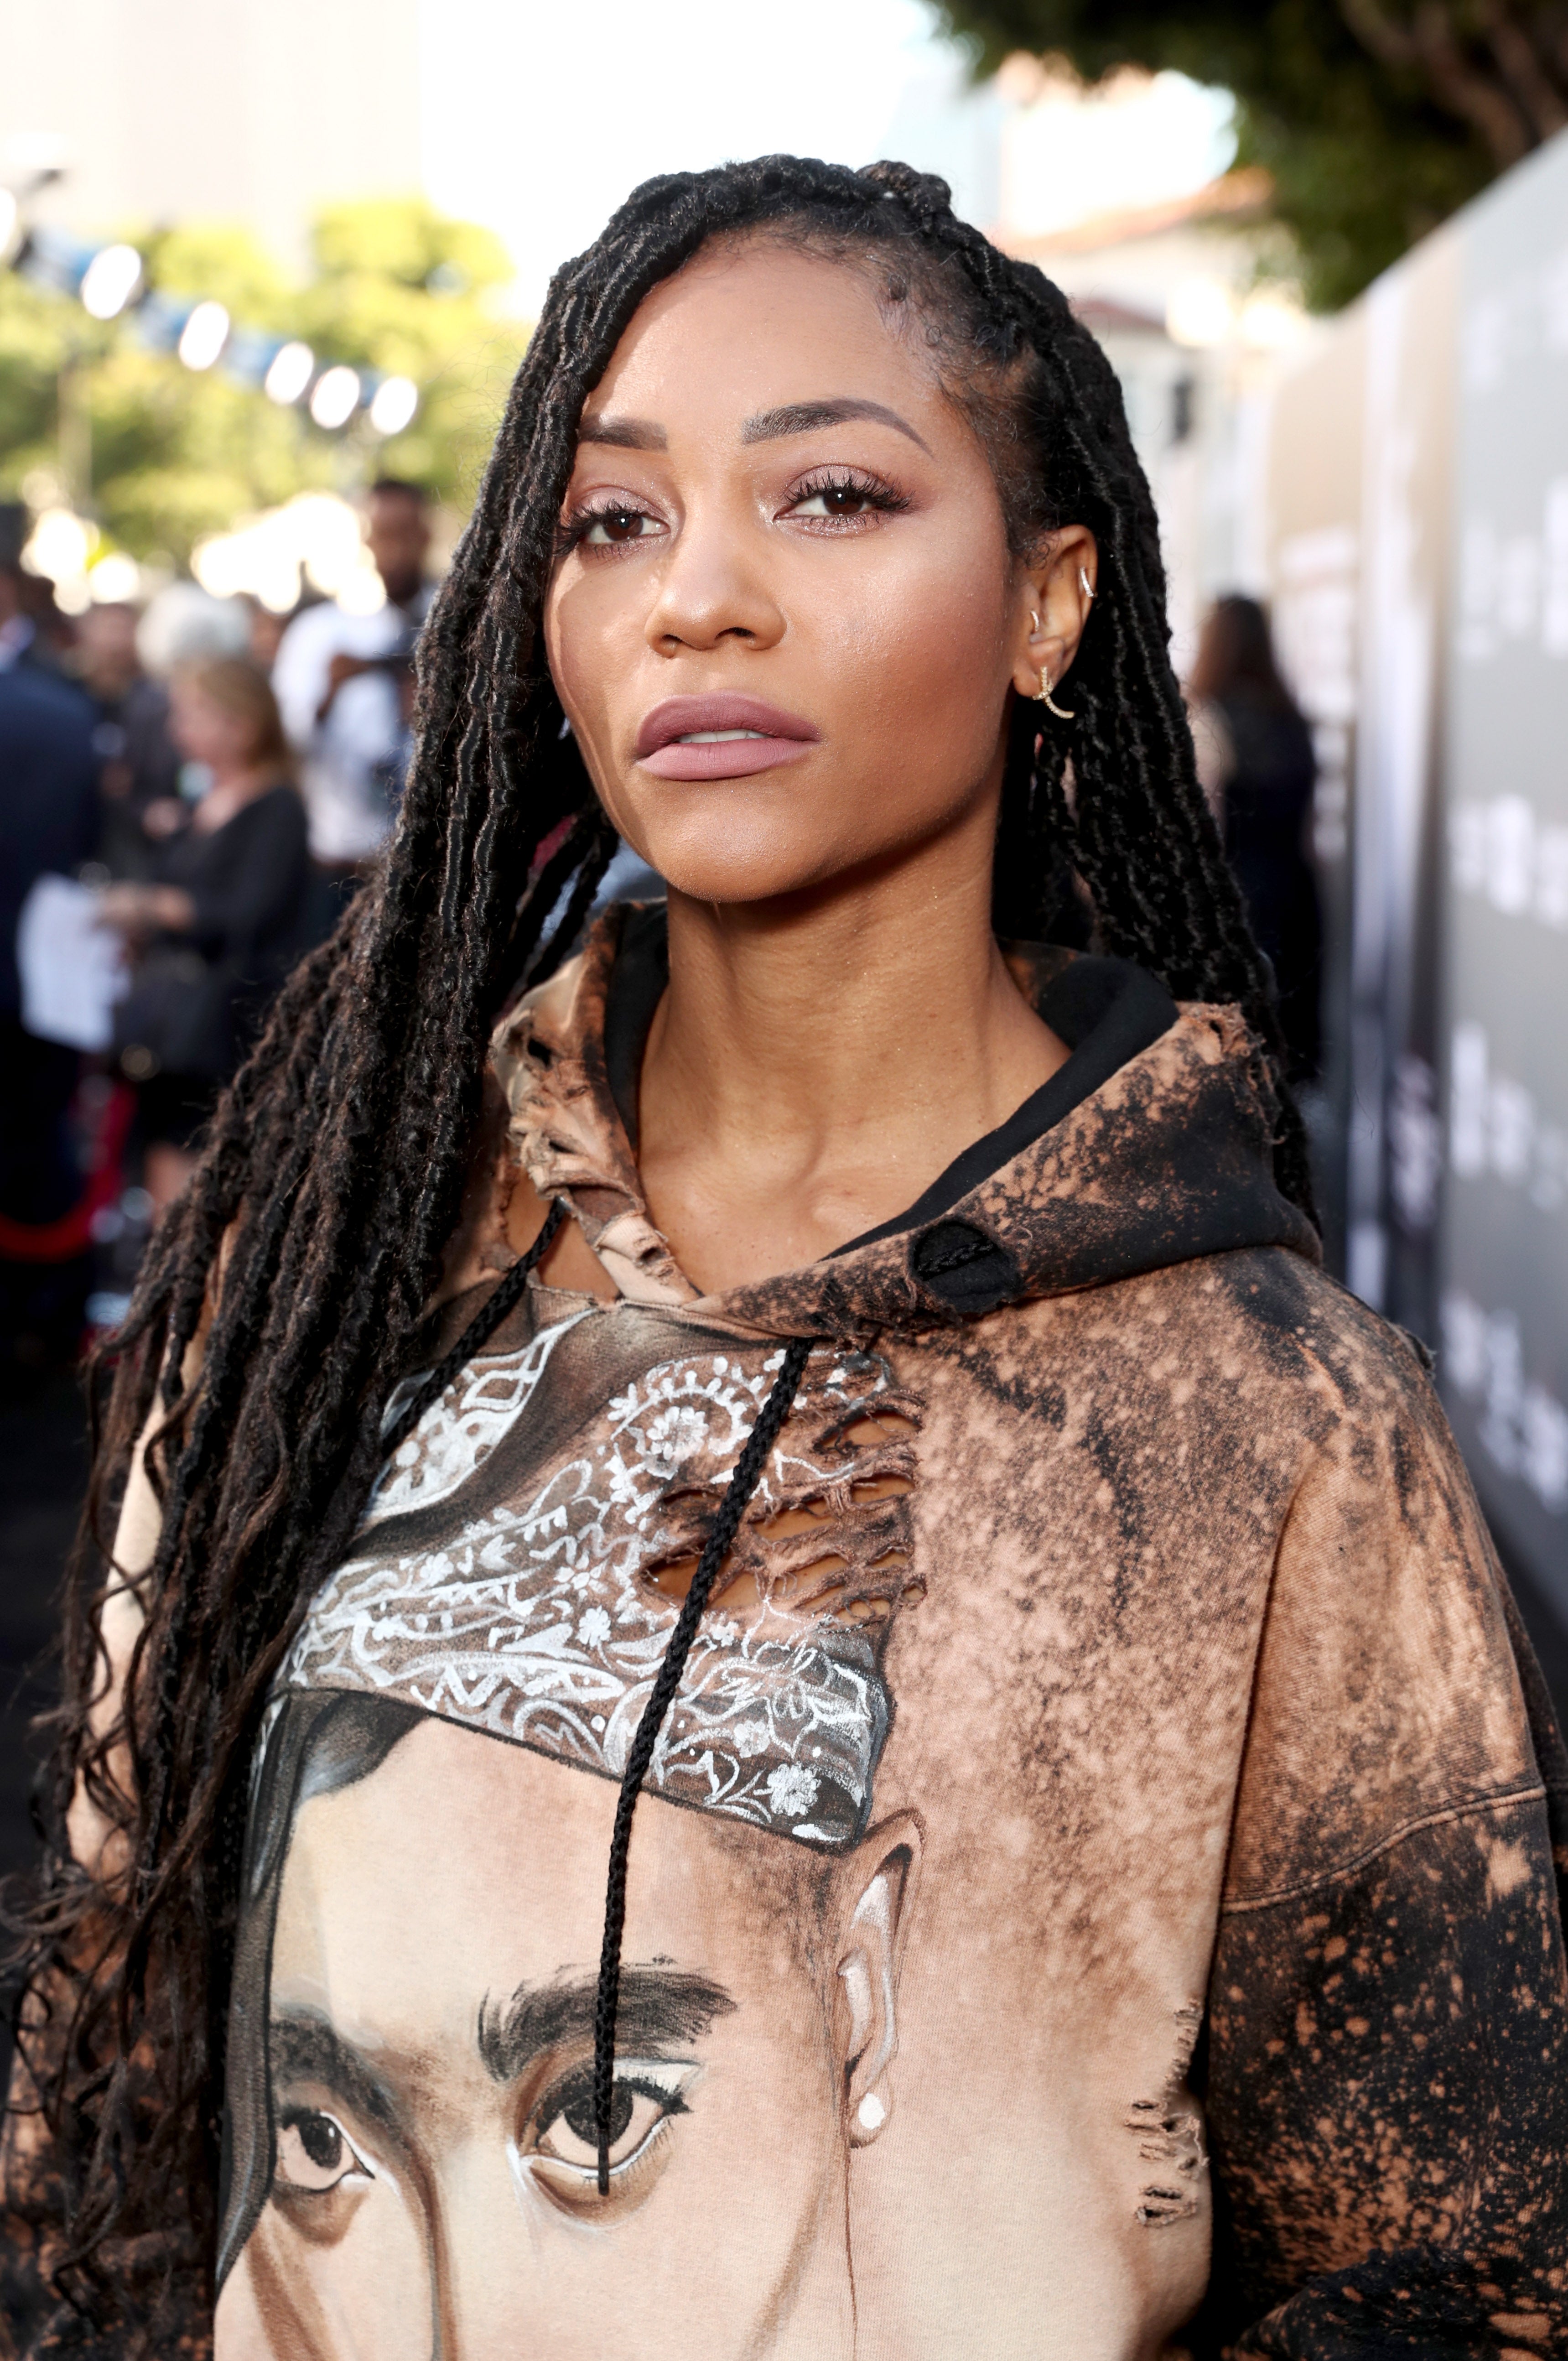 Beautiful Braids, Curls and Locs Spotted at the 'All Eyez On Me' L.A. Premiere
